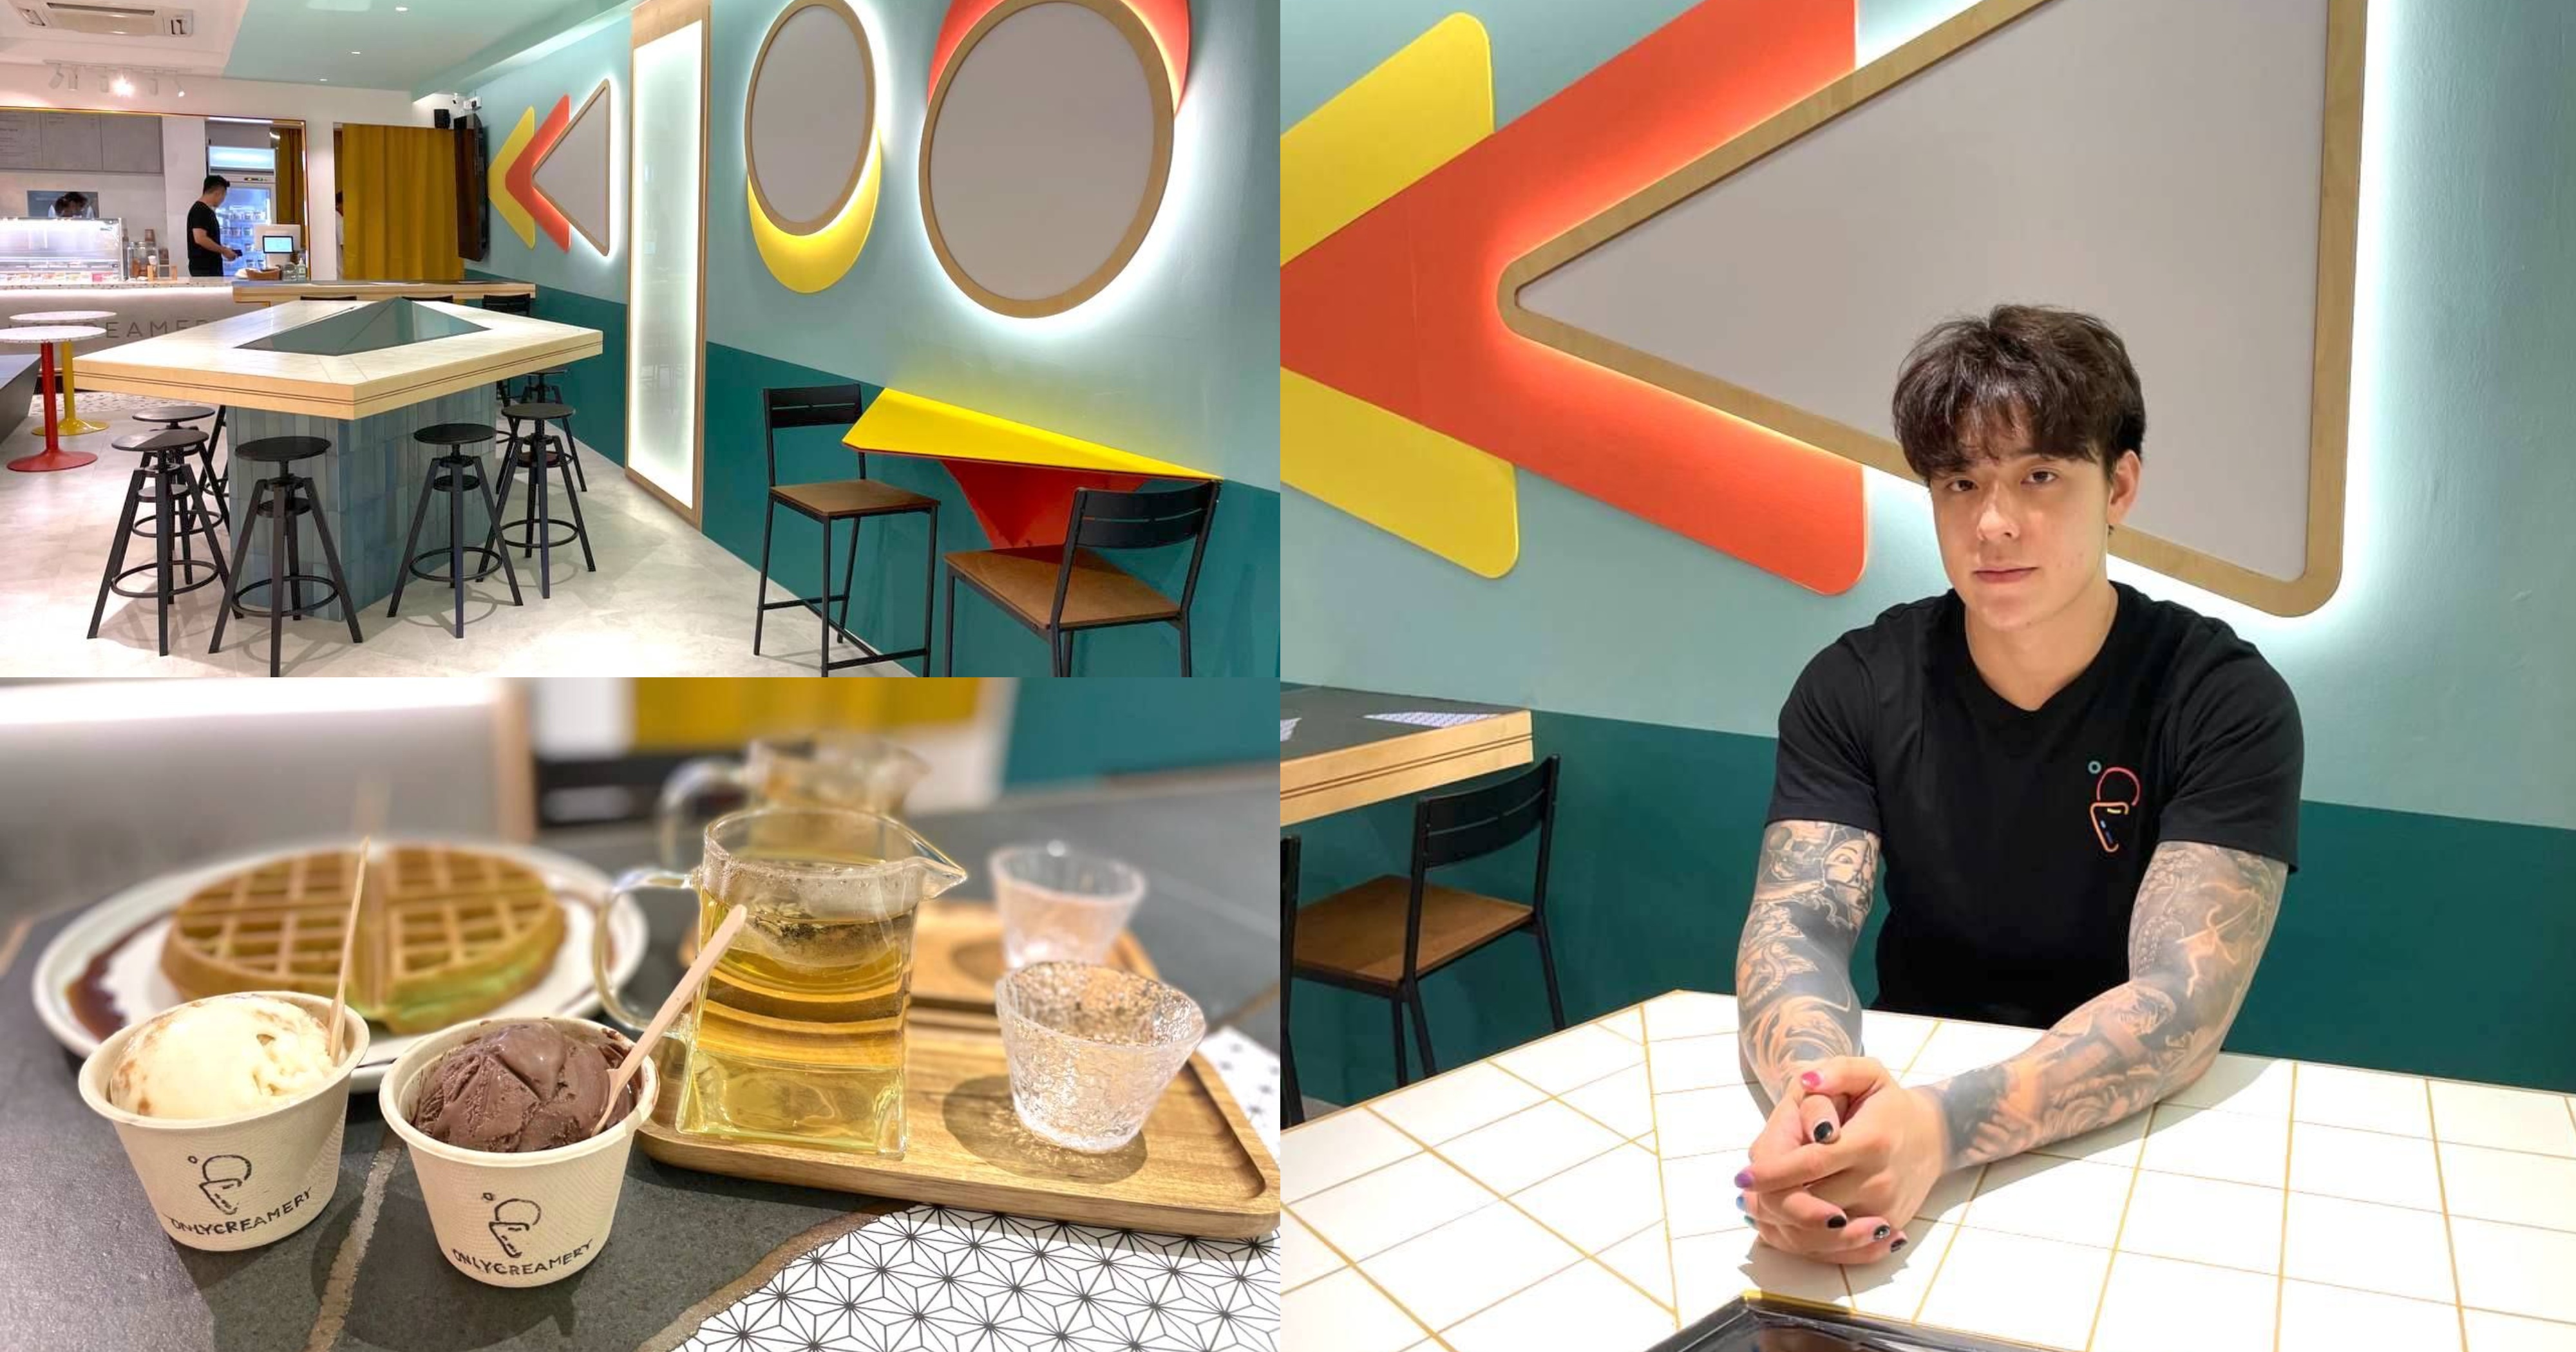 OnlyFans creator, Titus Low, 22, opening his dessert cafe Only Creamery on 6.9